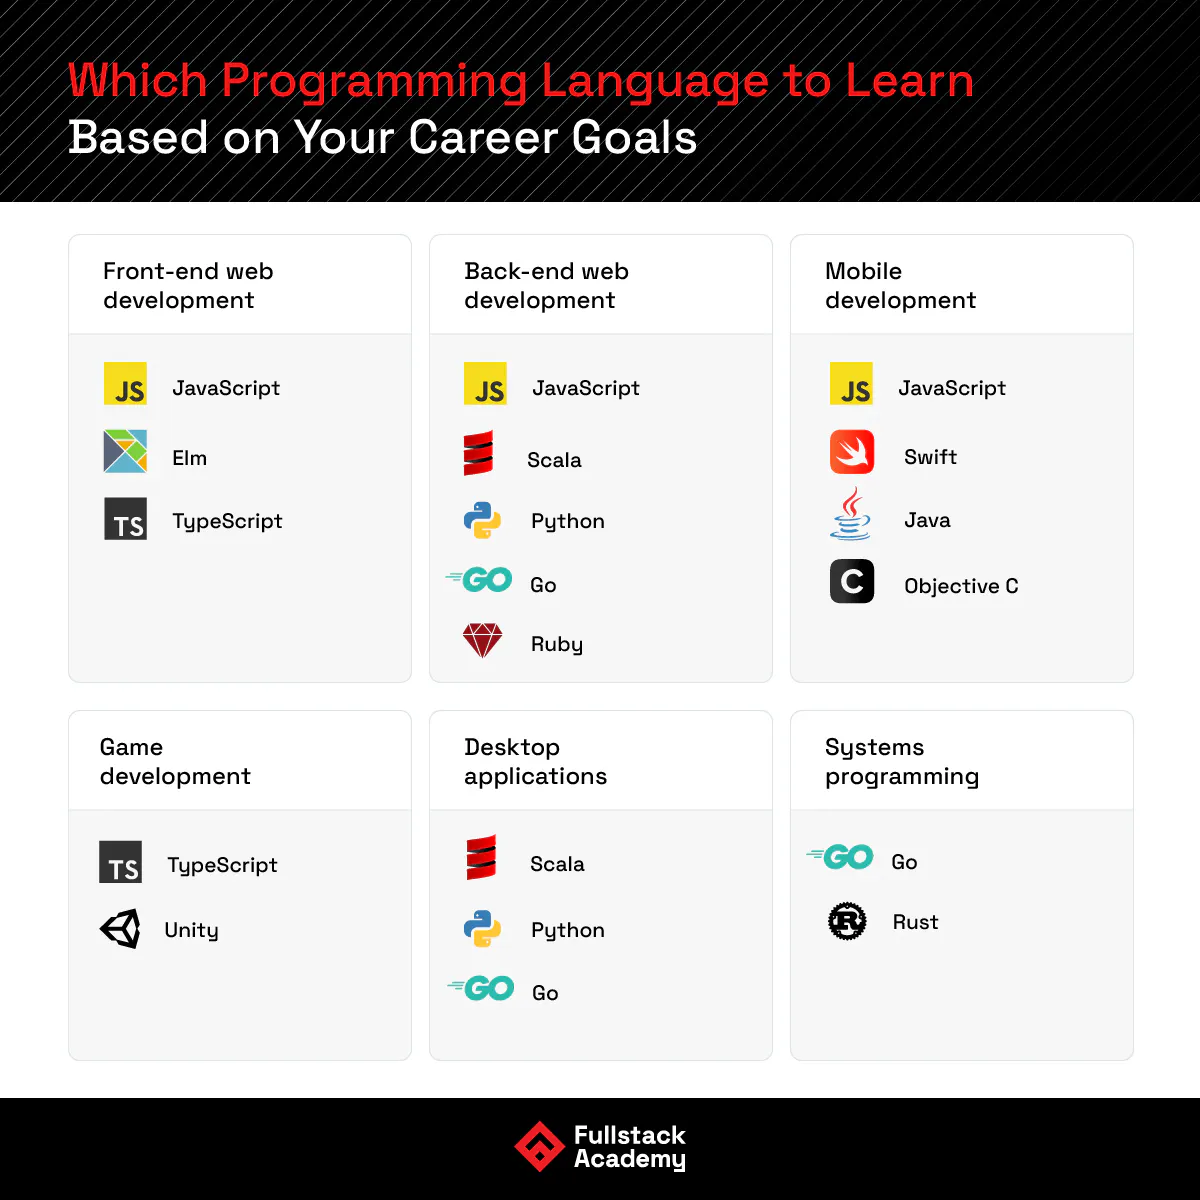 What Is a Programming Language